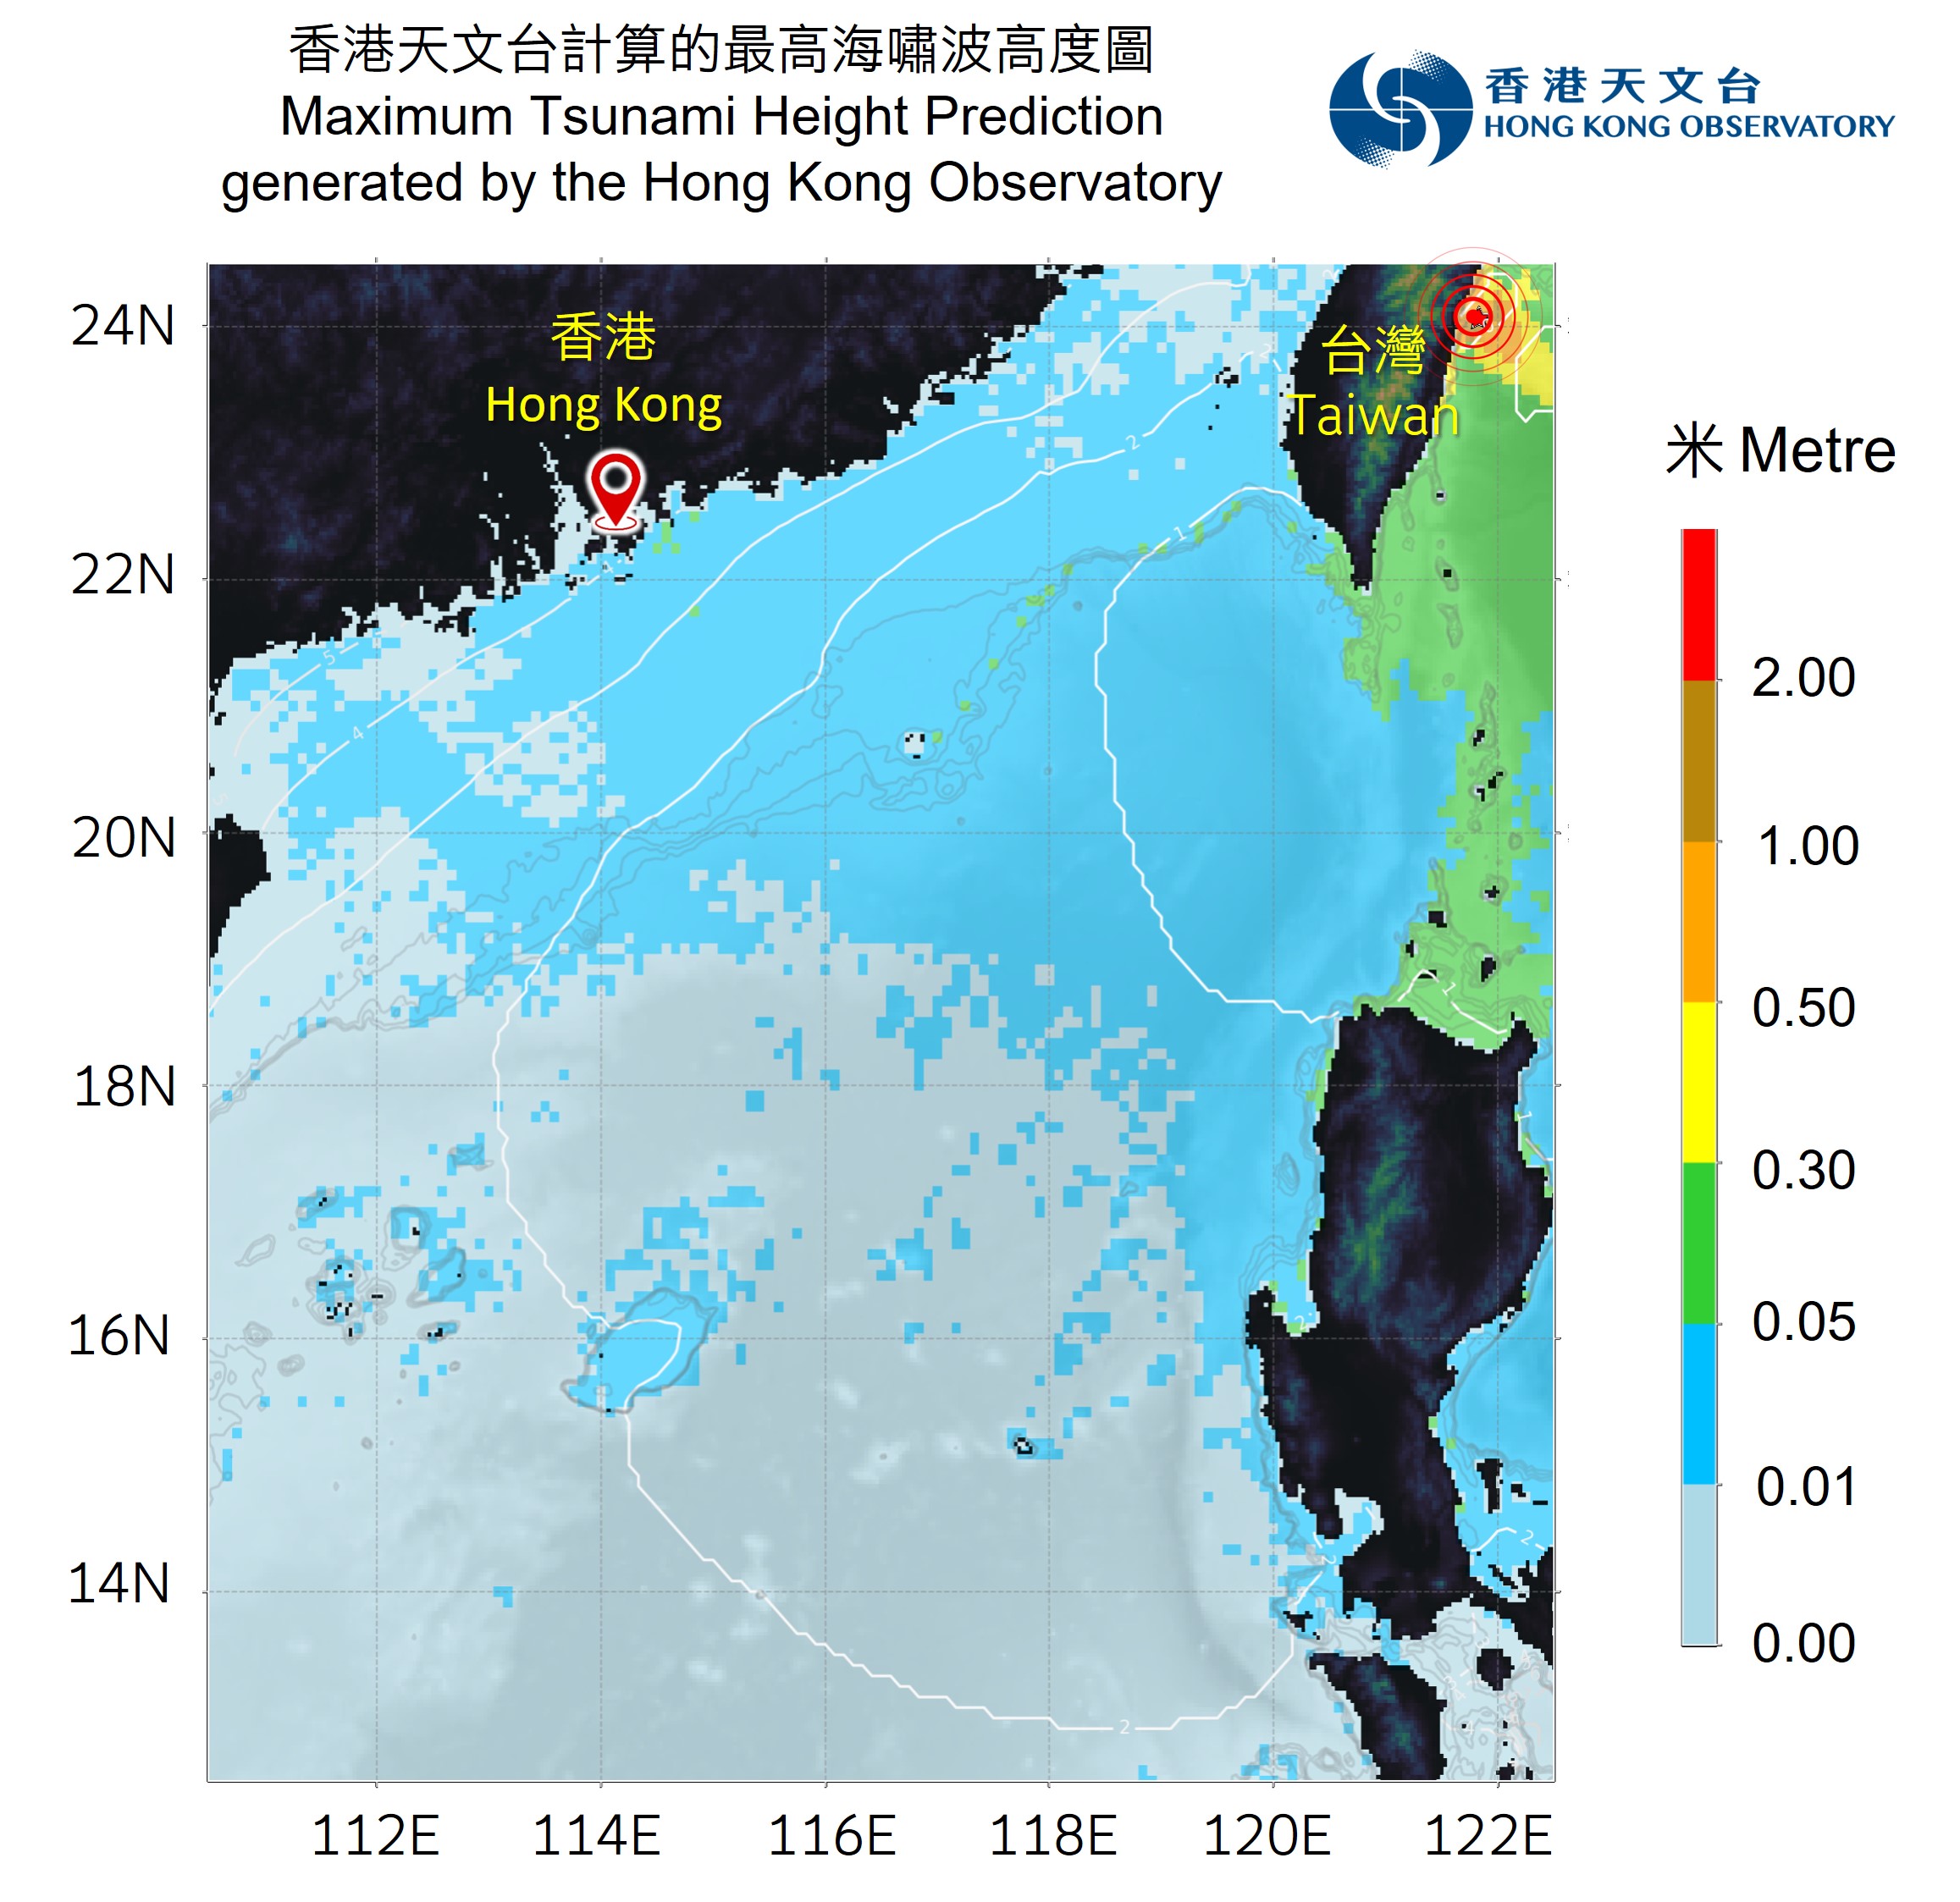 The predicted tsunami wave height and tsunami travel time of the 2024 Hualian earthquake event